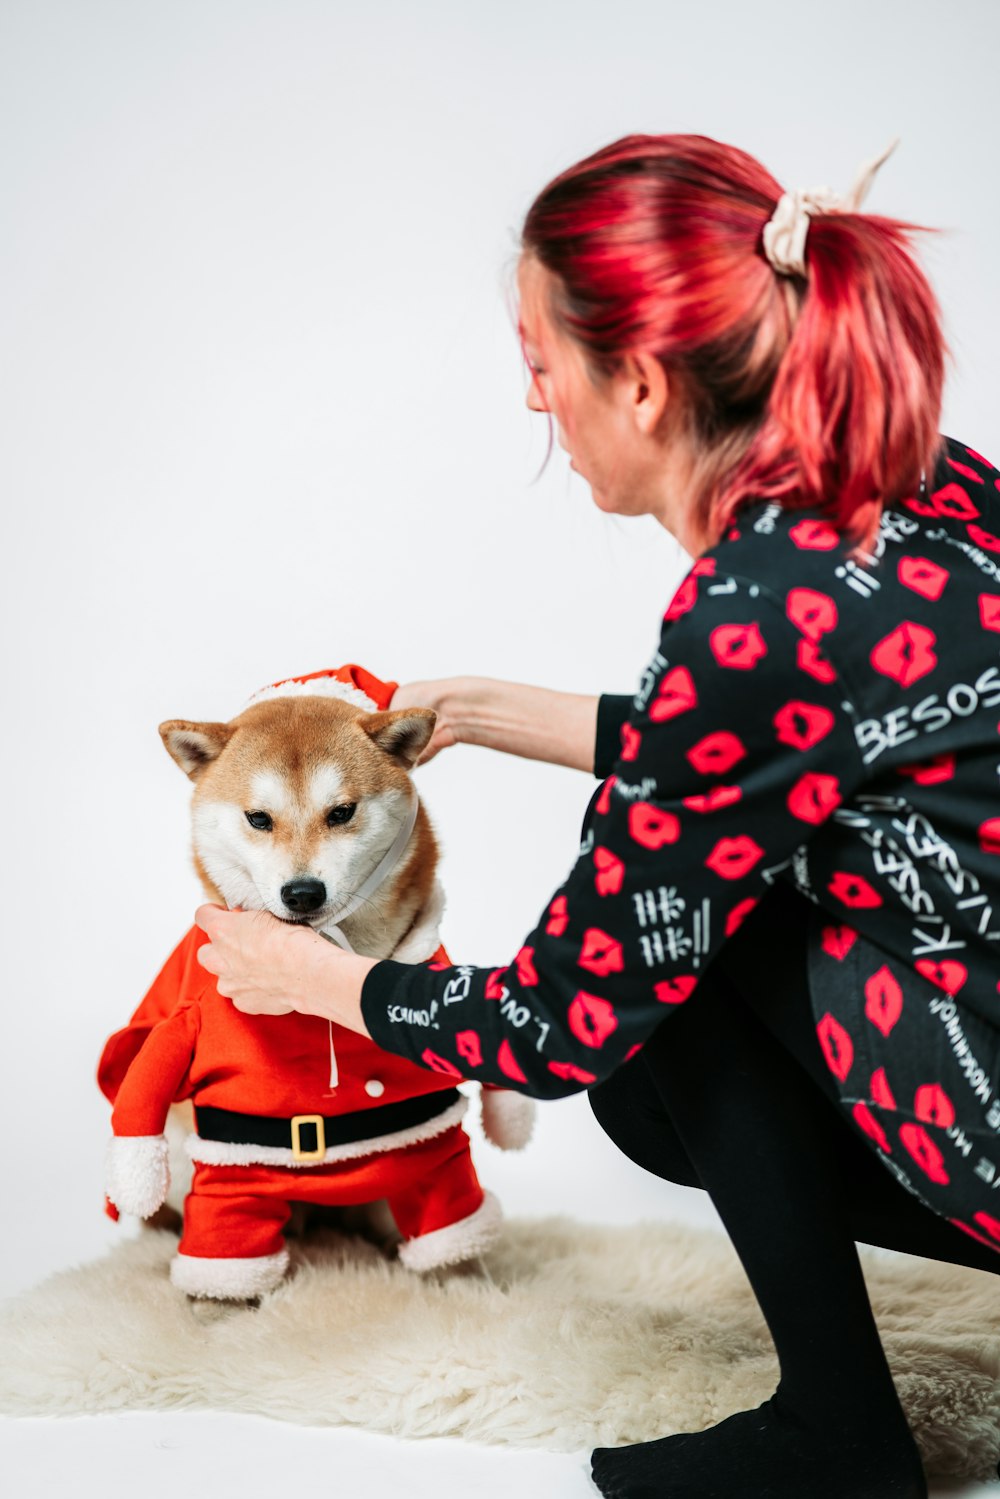 a woman petting a small dog dressed in a red outfit